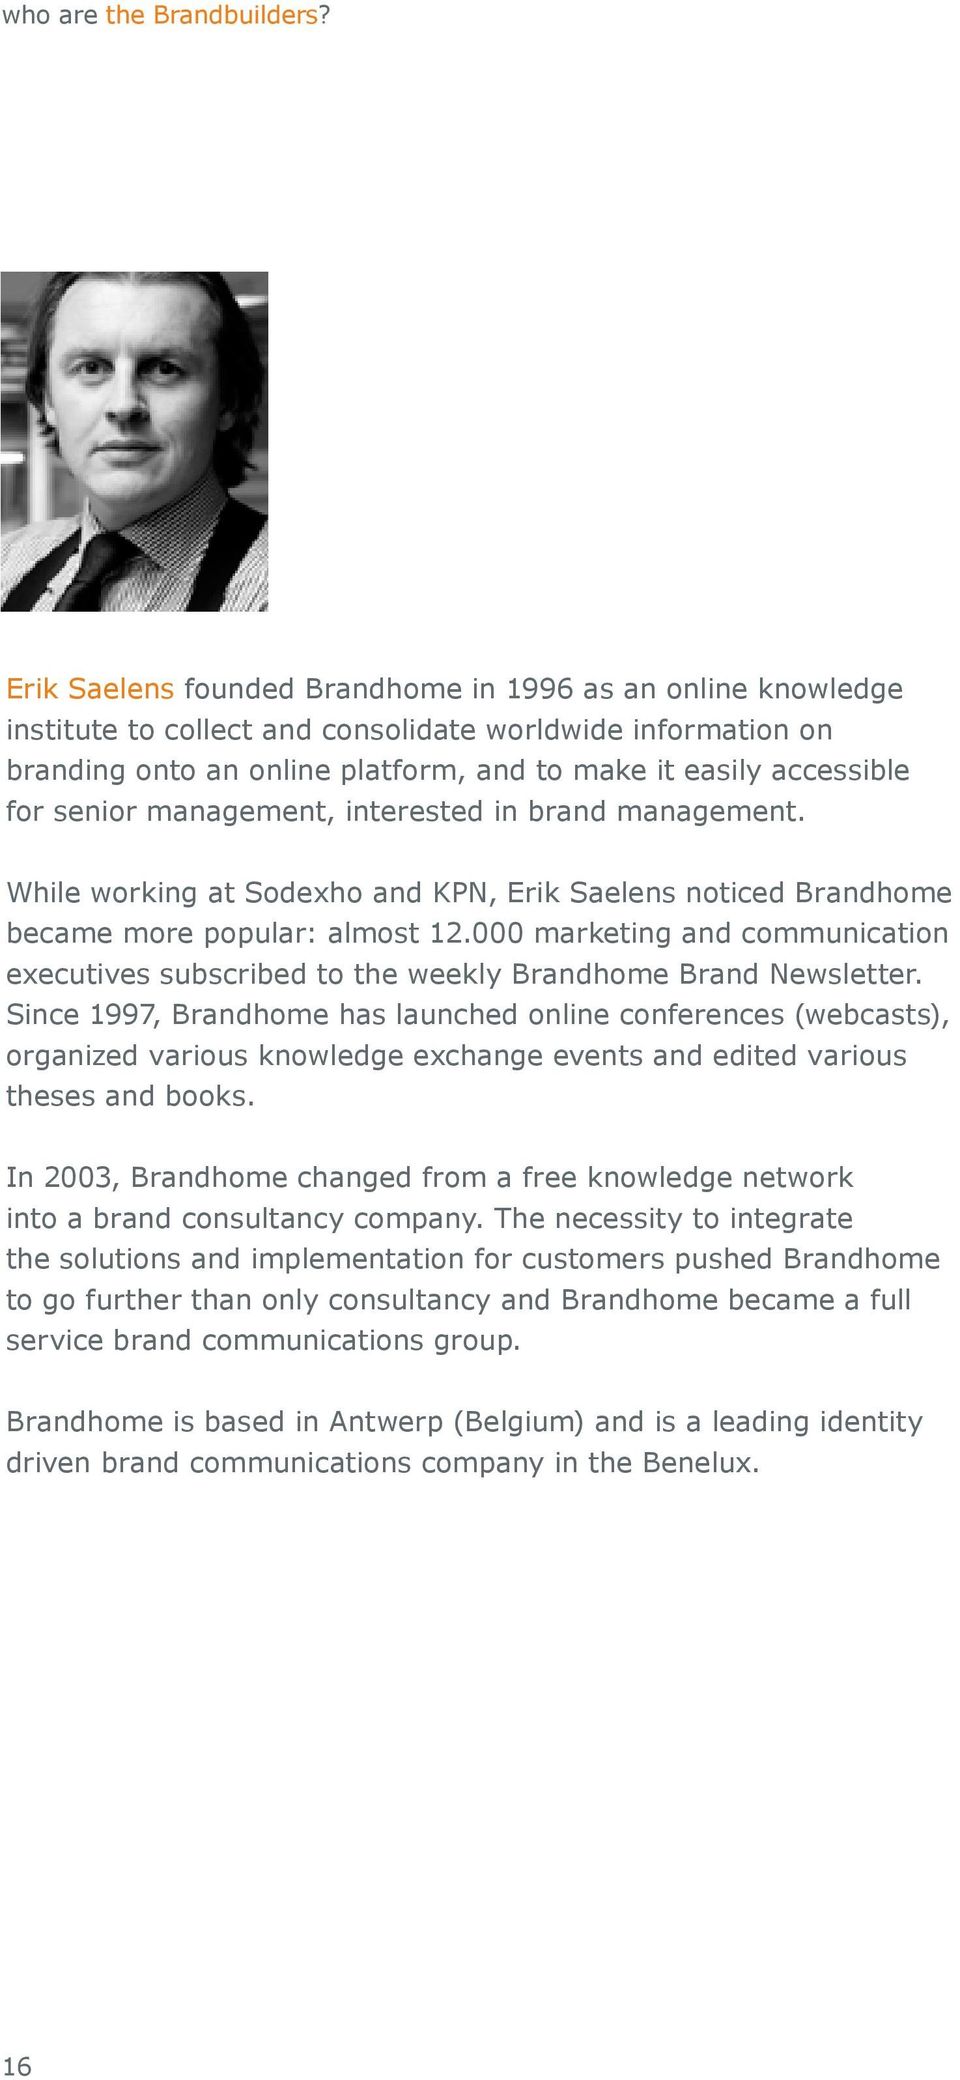 management. While working at Sodexho and KPN, Erik Saelens noticed Brandhome became more popular: almost 12.